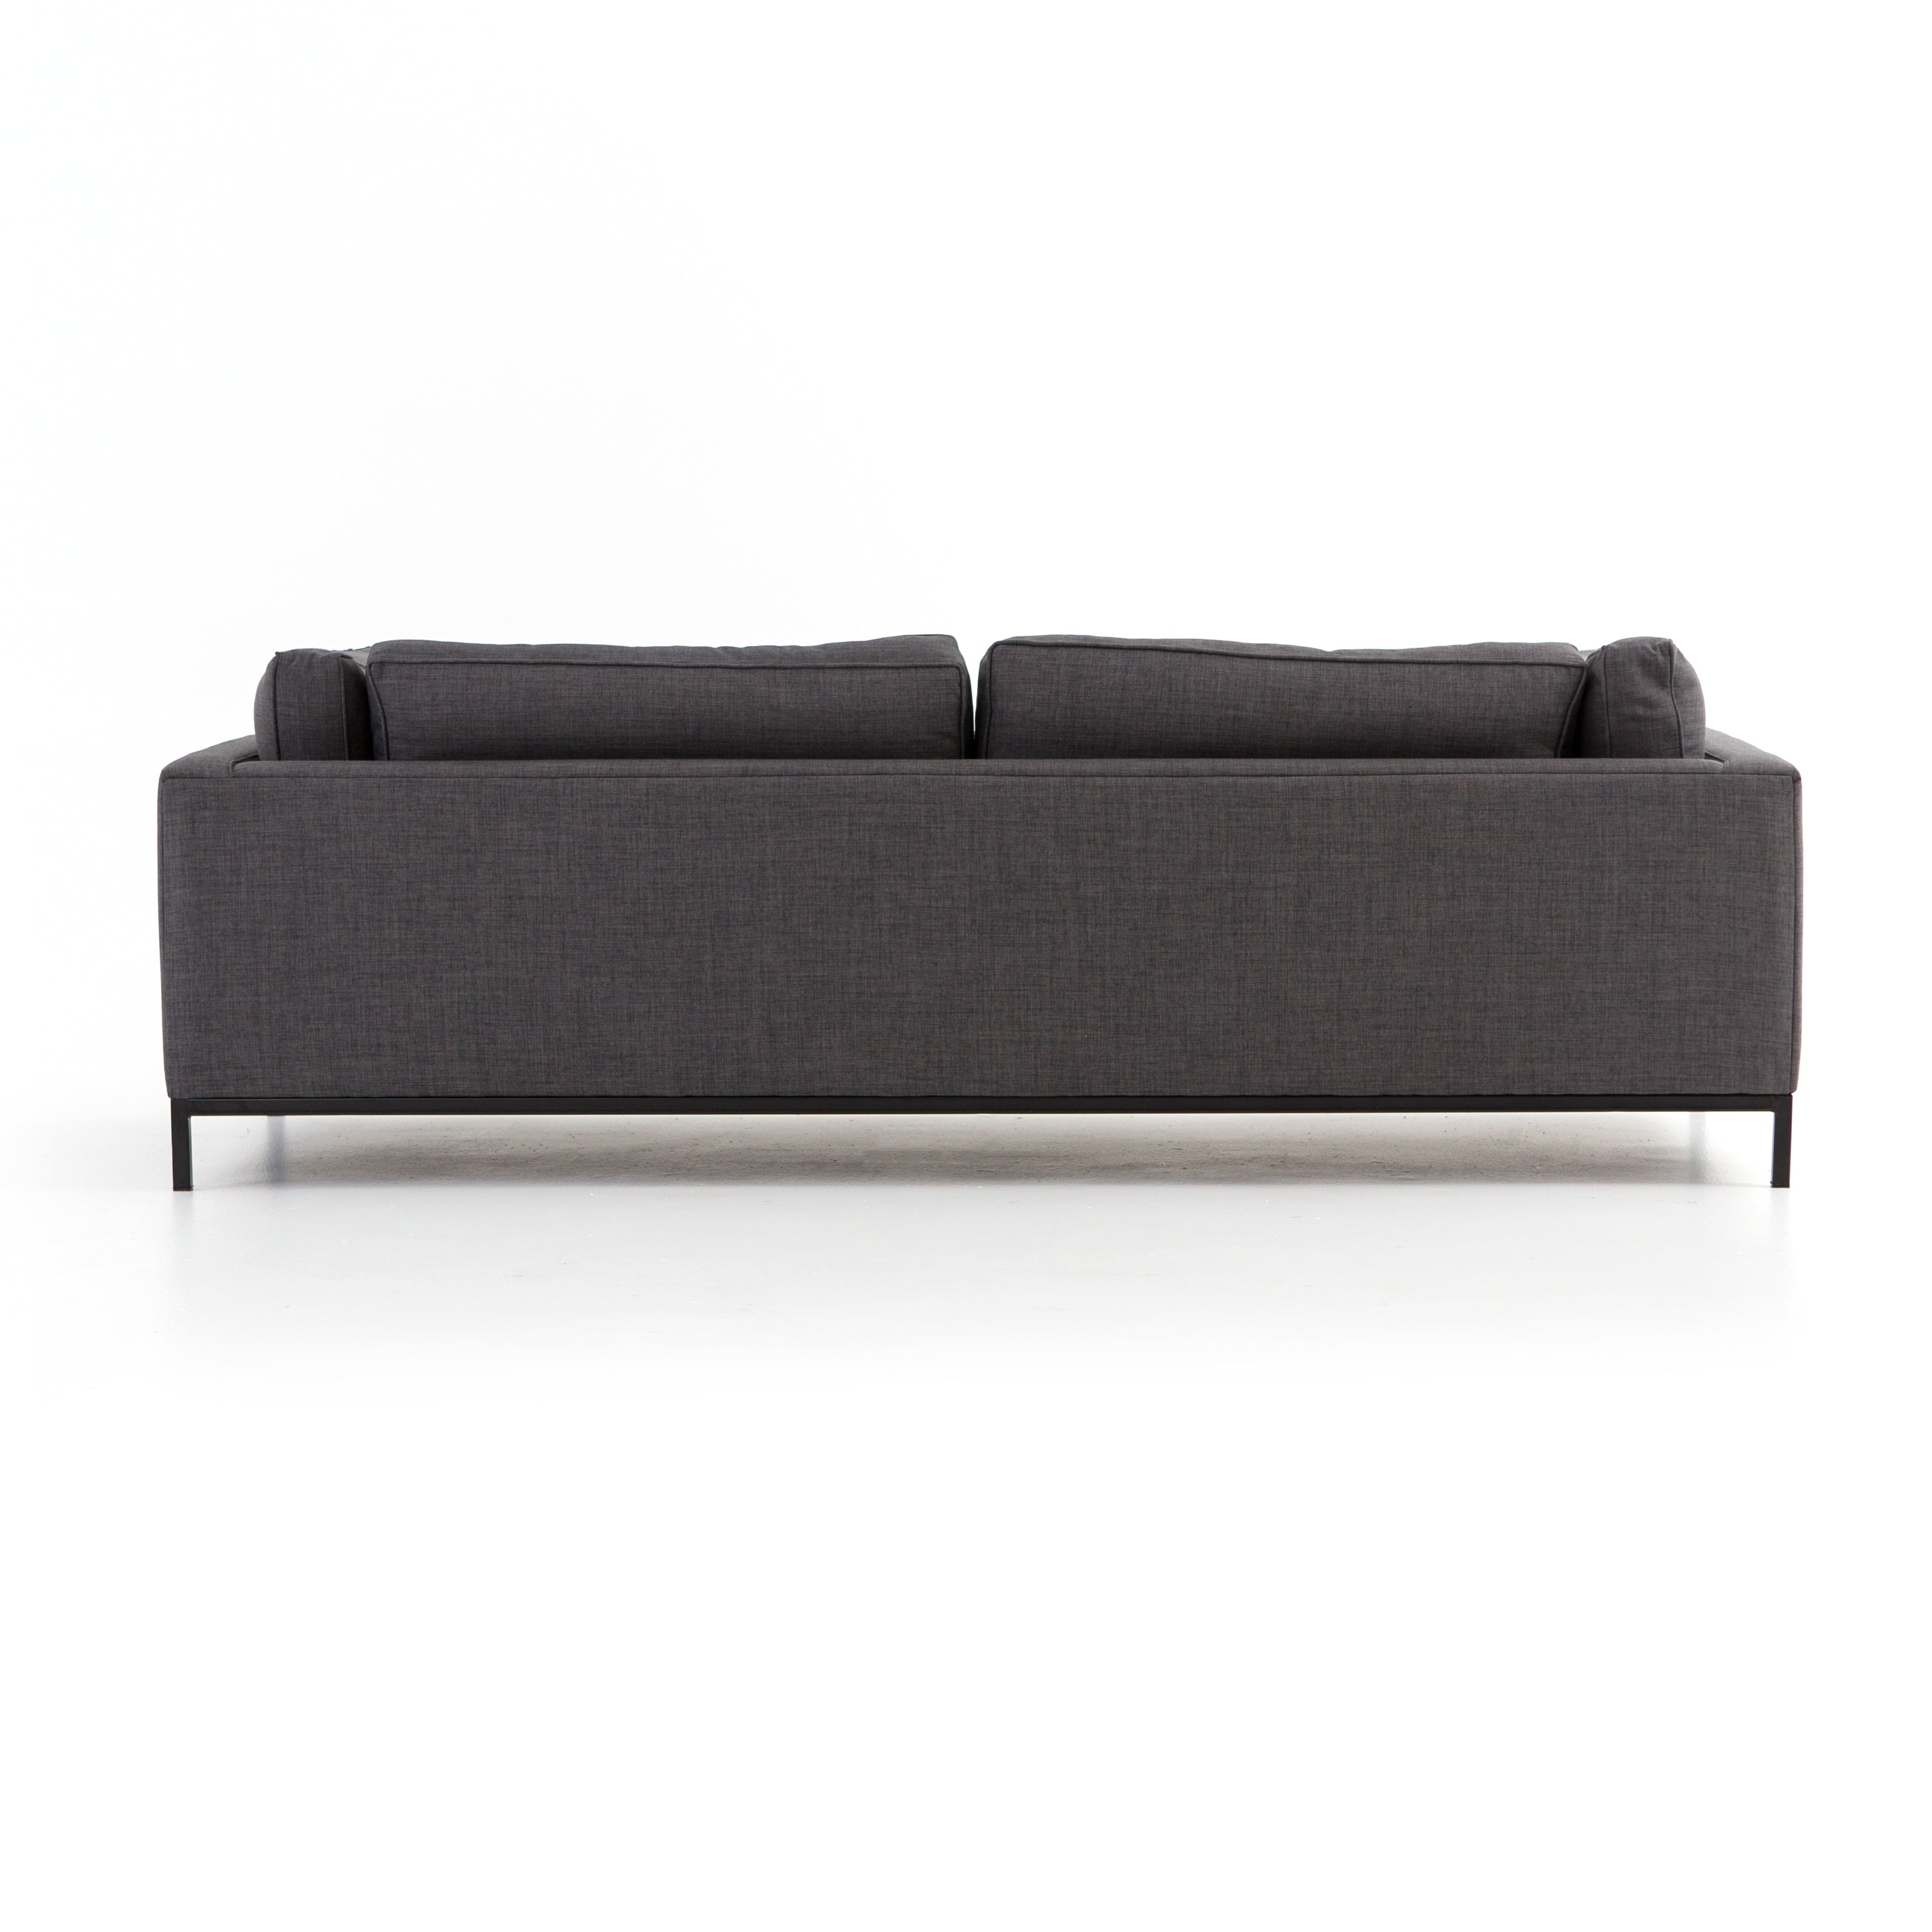 Streamlined yet comfortable!  We loved the subtle piping of the cushion details and stress-free color!  Flexible style, luxurious comfort and family-friendly upholstery. Clean, simple lines and black iron base keep everything casual and chic.  Overall Dimensions: 92.00"w x 38.00"d x 30.00"h